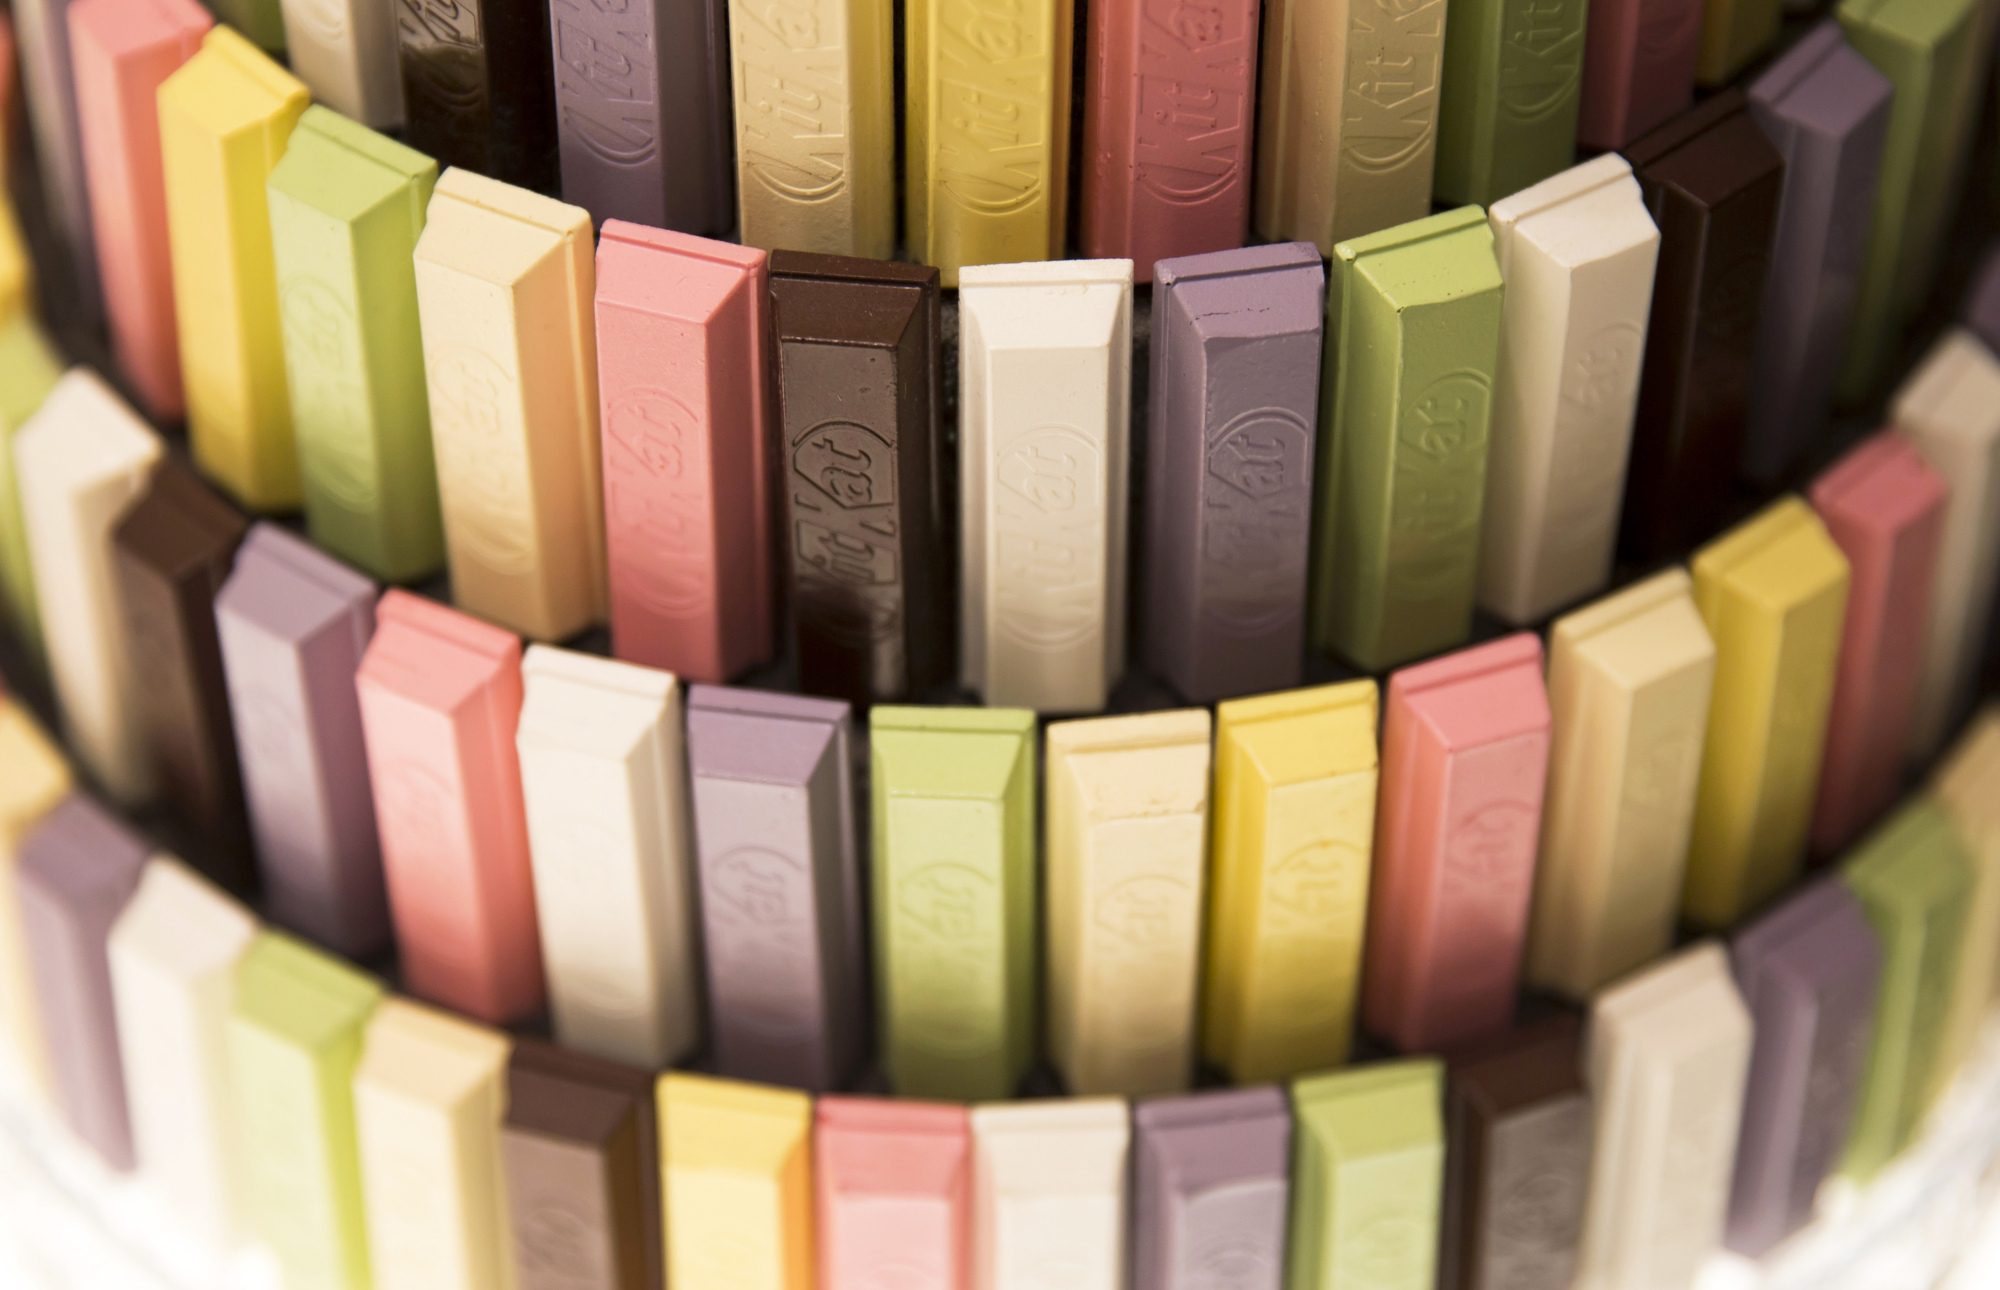 Bars of KitKat chocolate are displayed at the Kitkat Chocolatory Ginza store.
